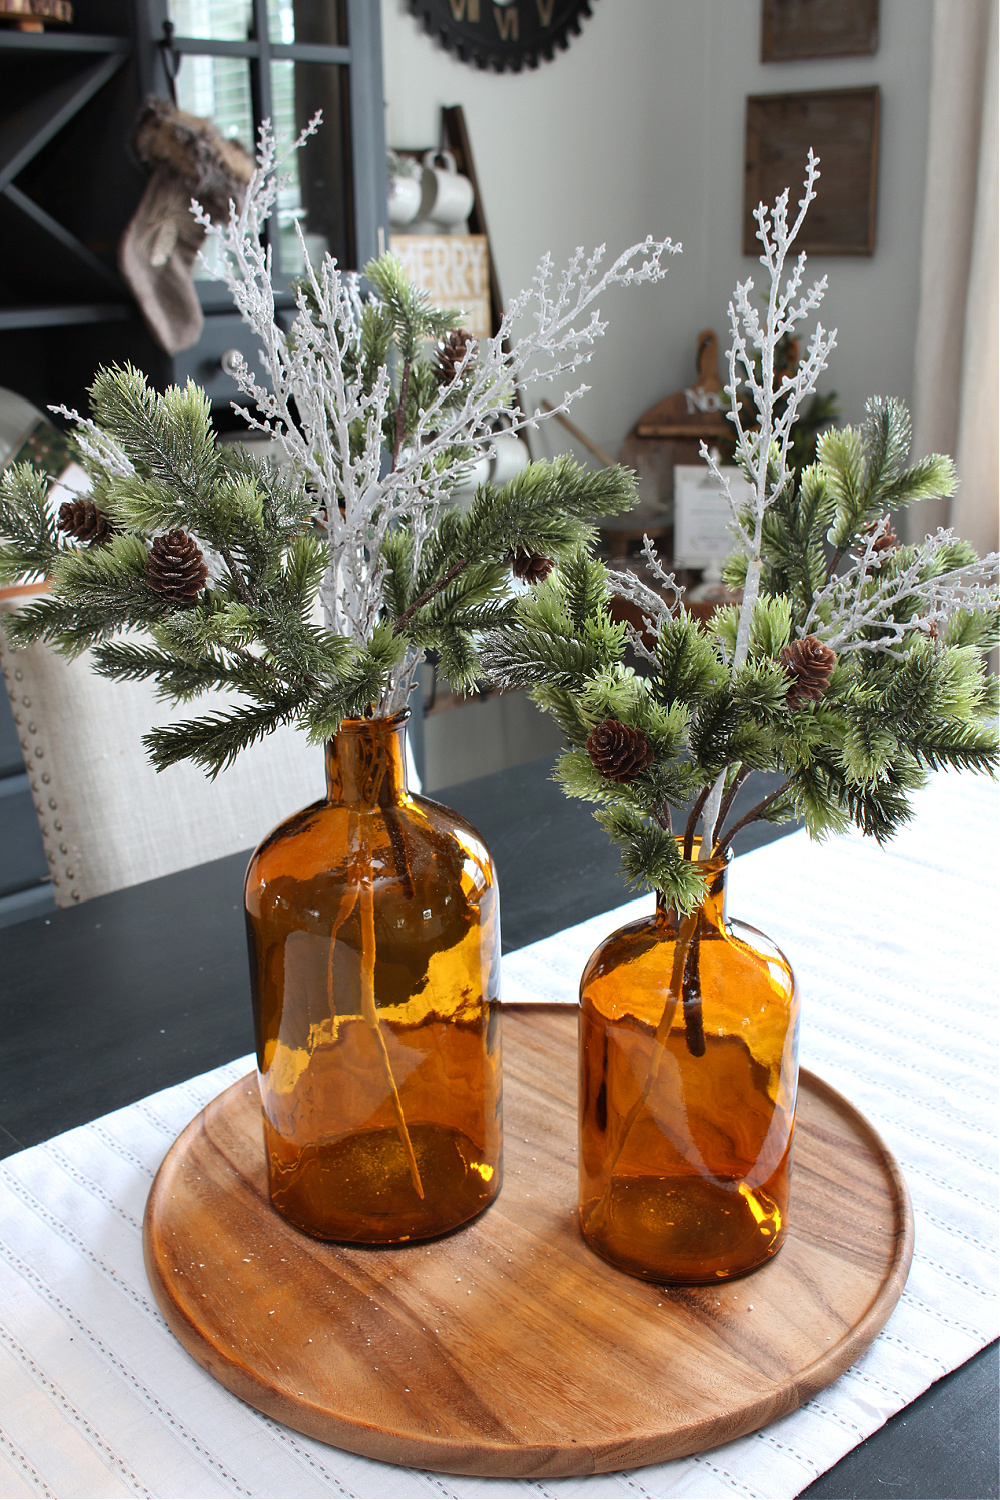 Pretty DIY Christmas centerpiece with amber bottles and greenery.